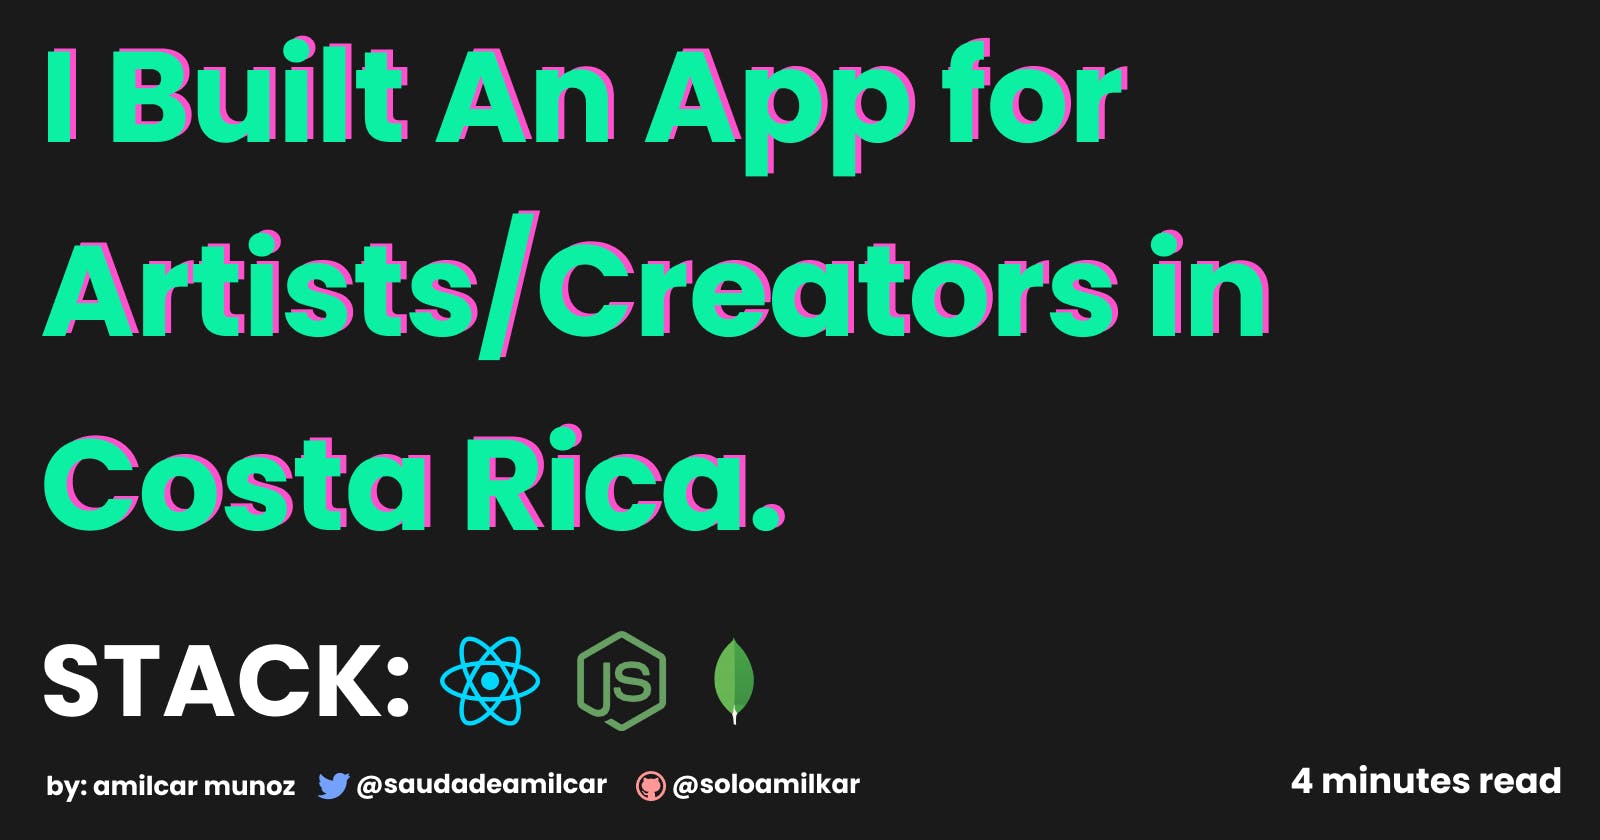 I Built An App for Artists/Creators in Costa Rica.